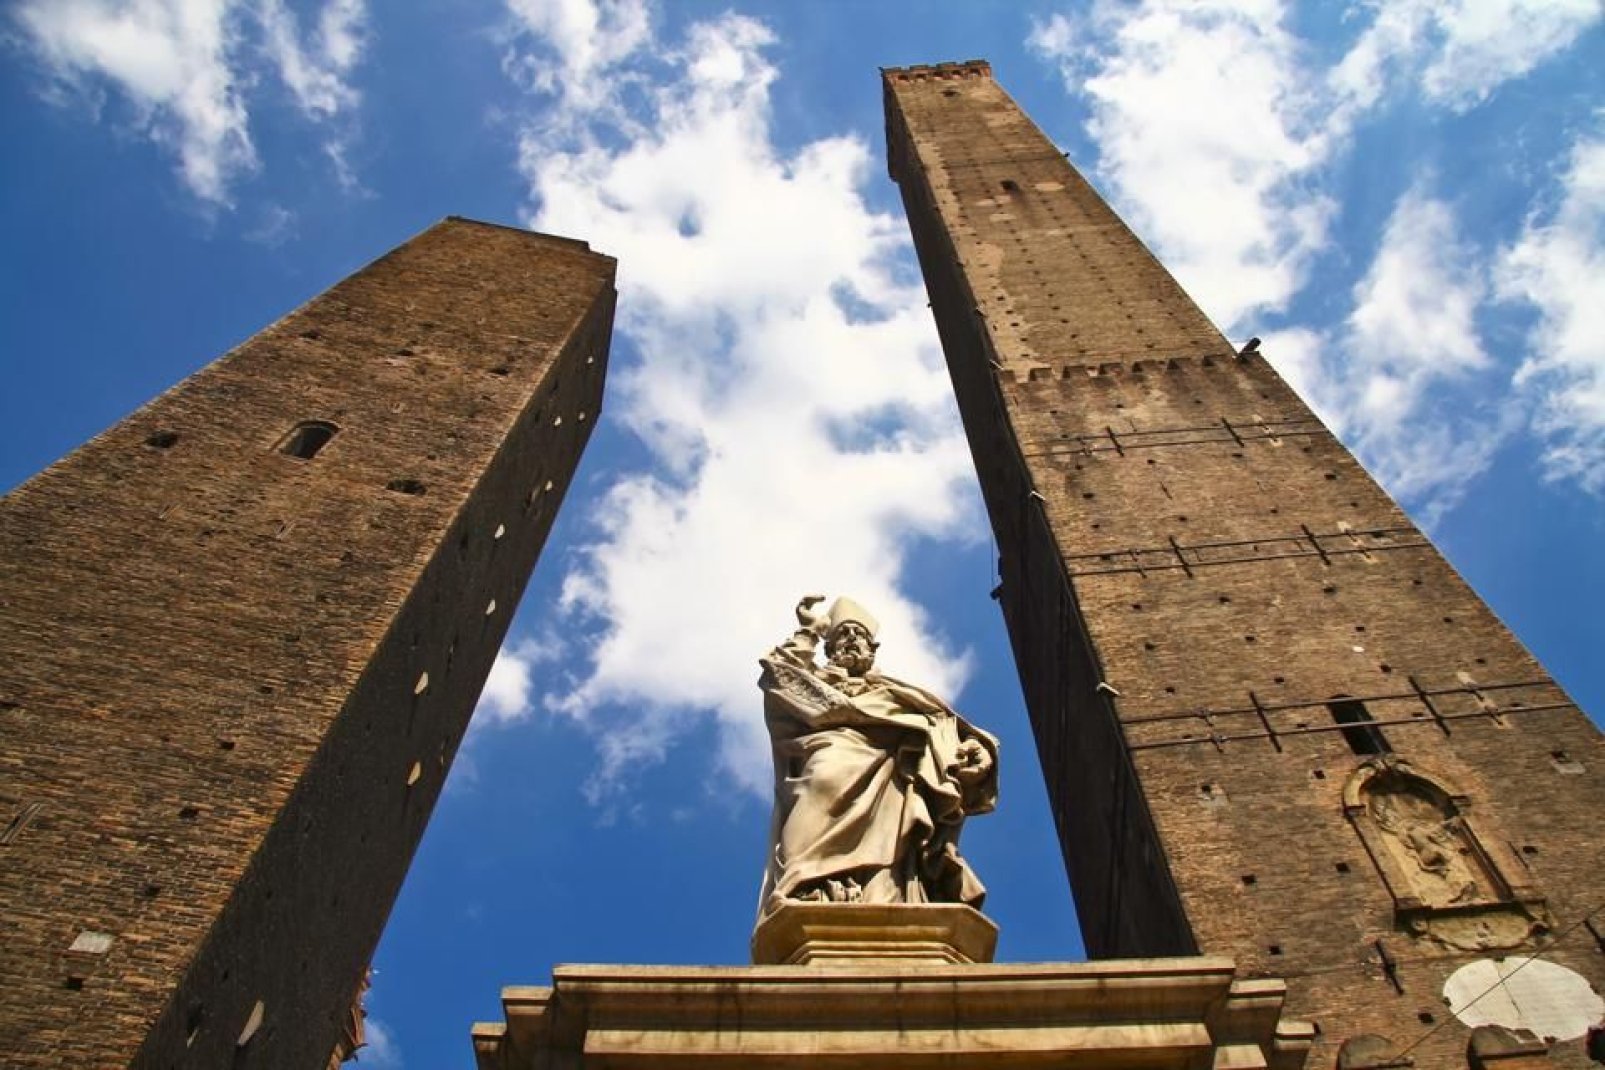 The Two Towers are the symbol of the city: the Asinelli Tower and the Garisenda Tower were commissioned by Ghibelline nobles in the 12th century.